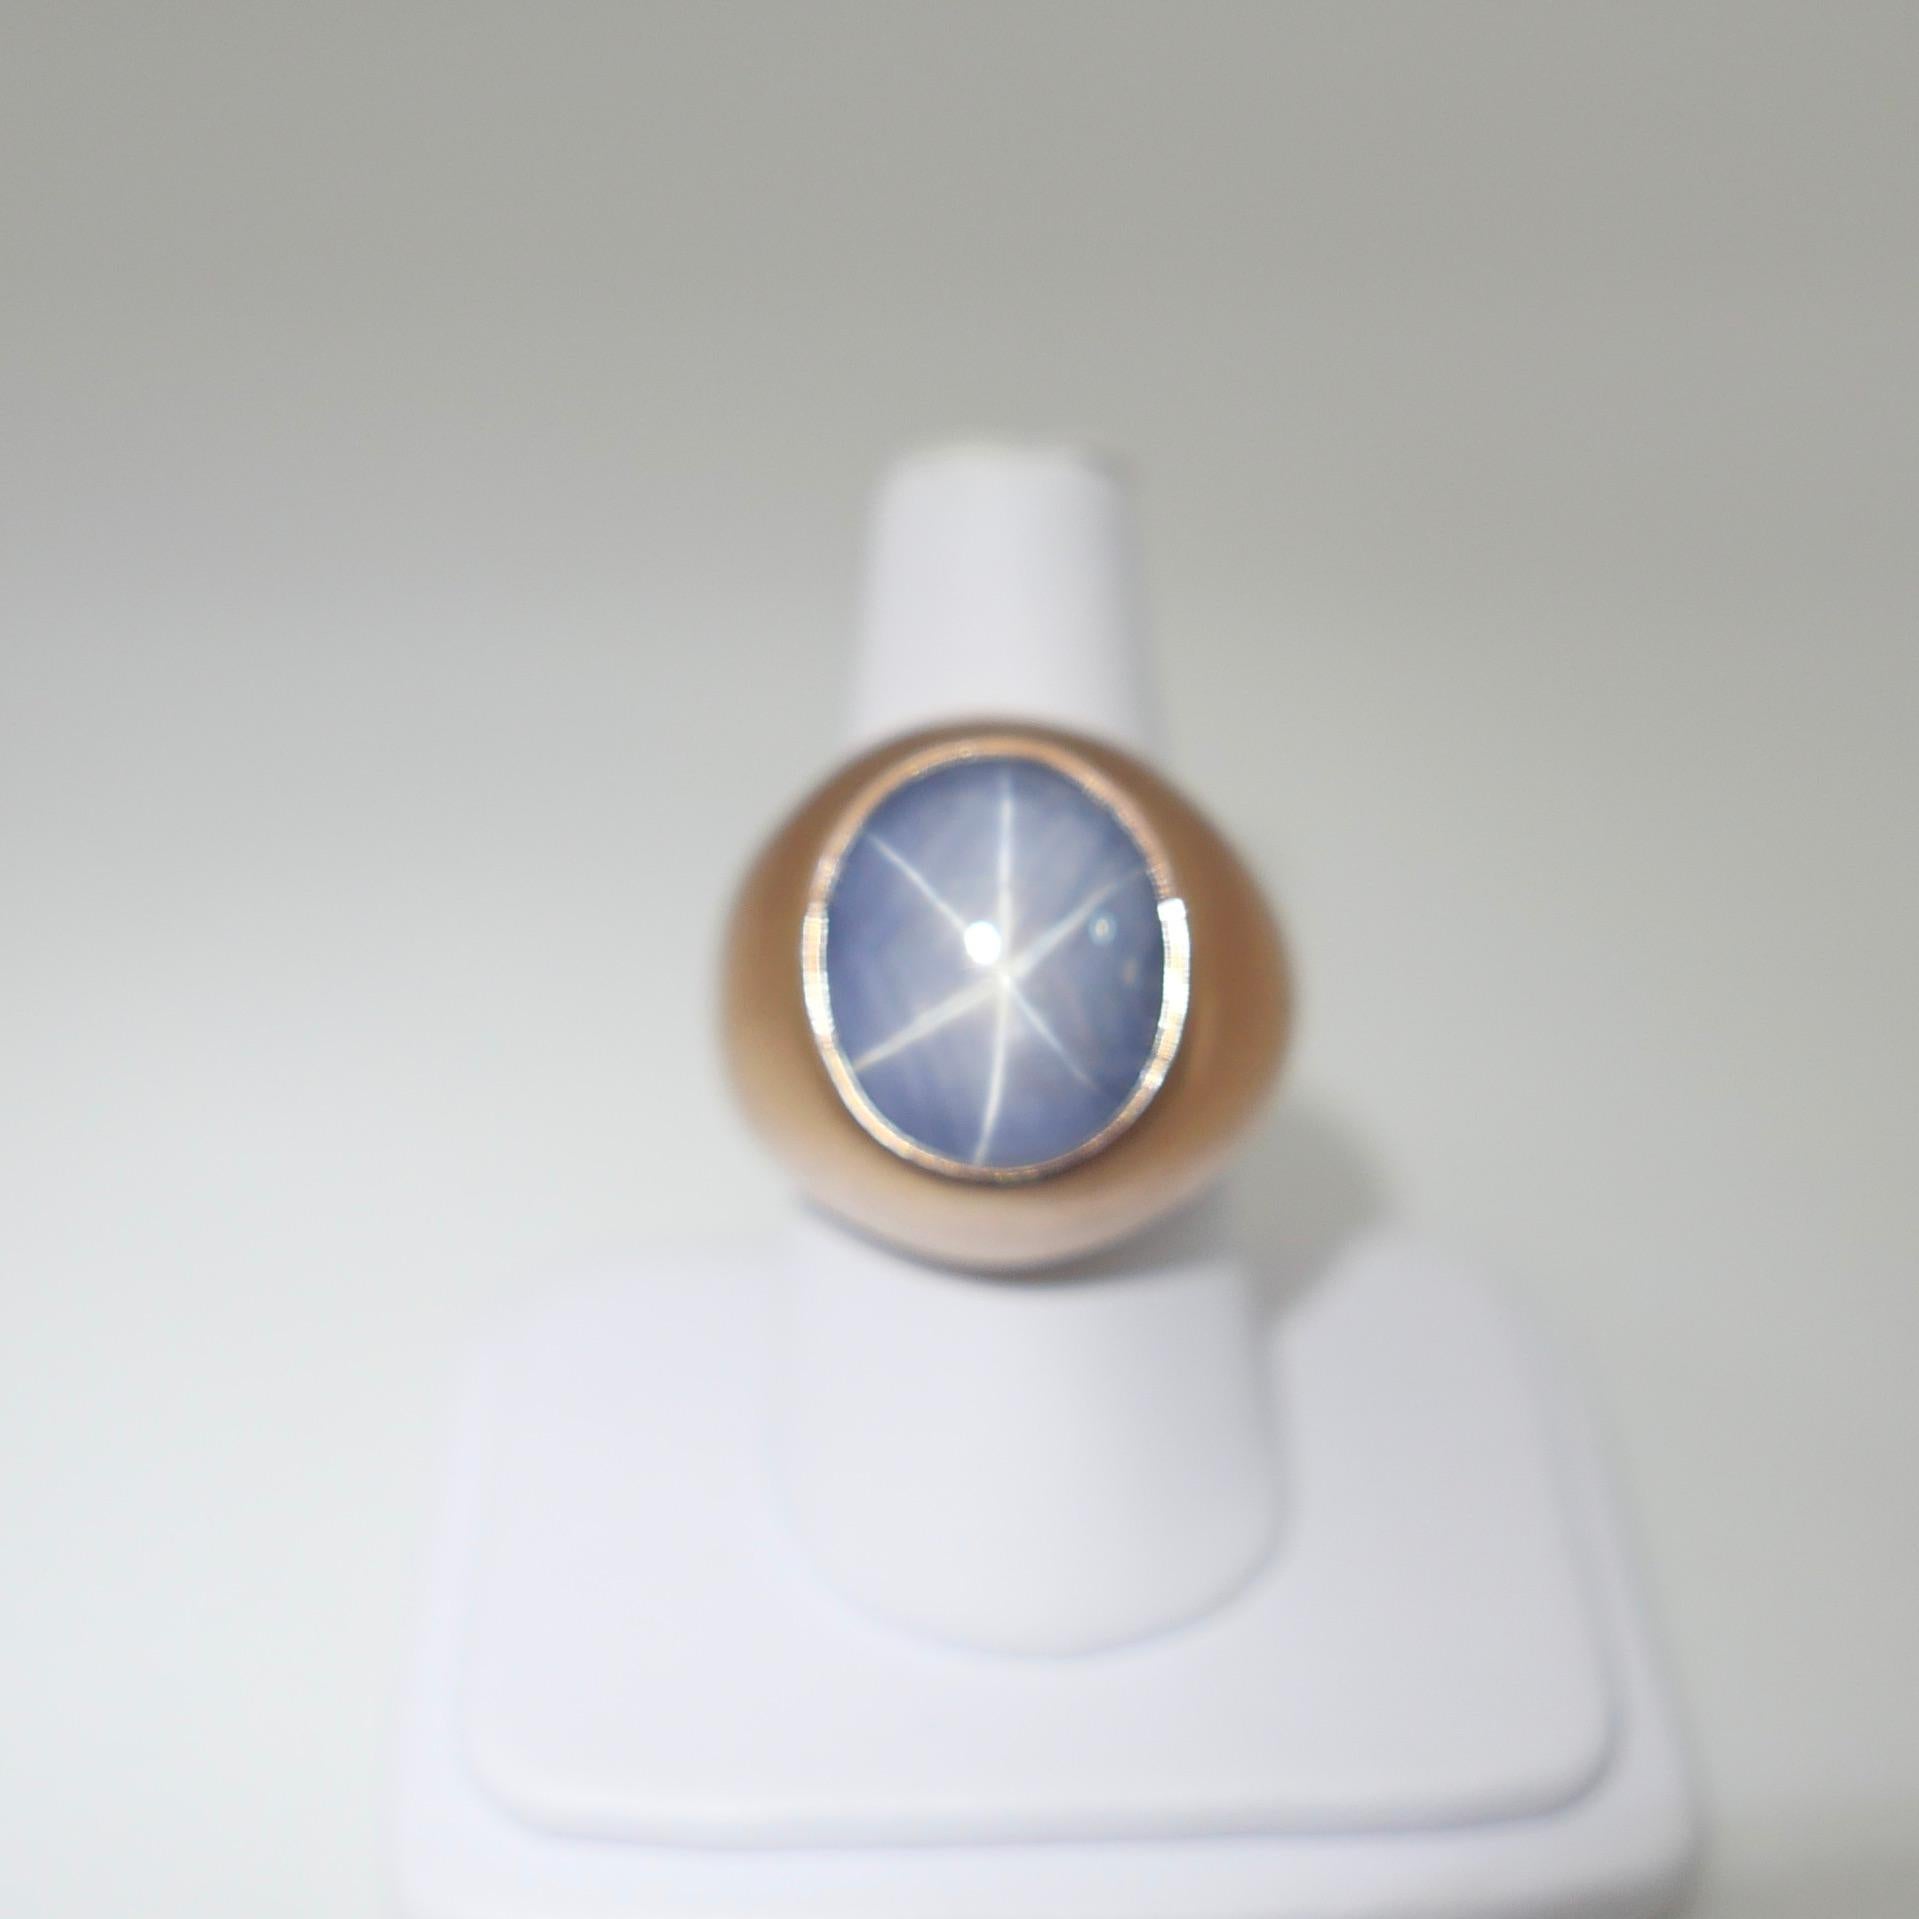 Certified Blue Star Sapphire 39.28 Carat Rose Gold Ring, Unisex, Strong Star 1